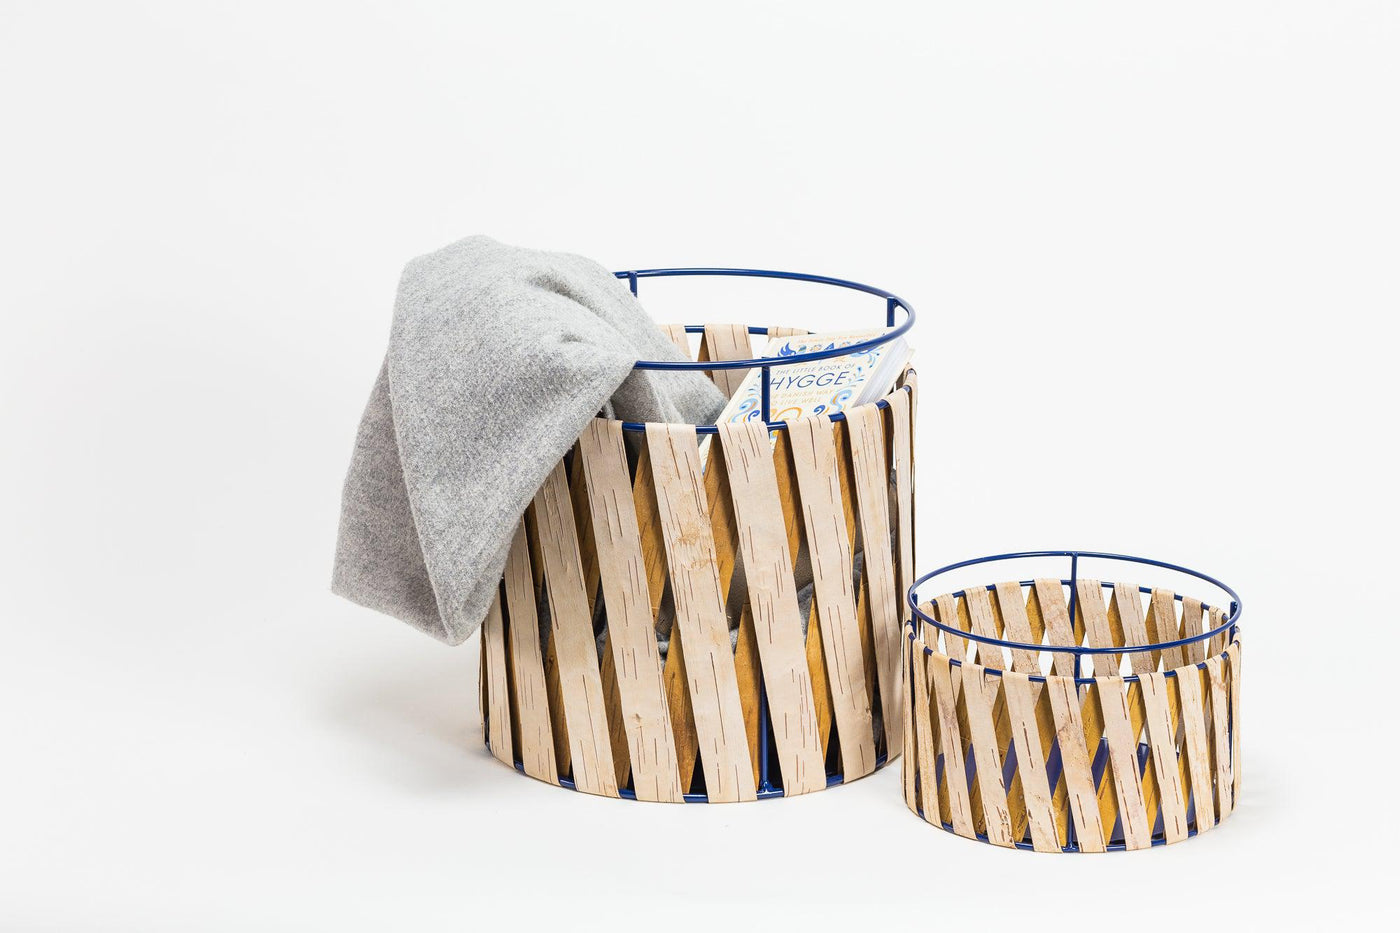 Korob Kast Birch Bark Basket-Storing and Organising-BIRCH BARK, BOXES / ORGANISERS / CONTAINERS-Forest Homes-Nature inspired decor-Nature decor